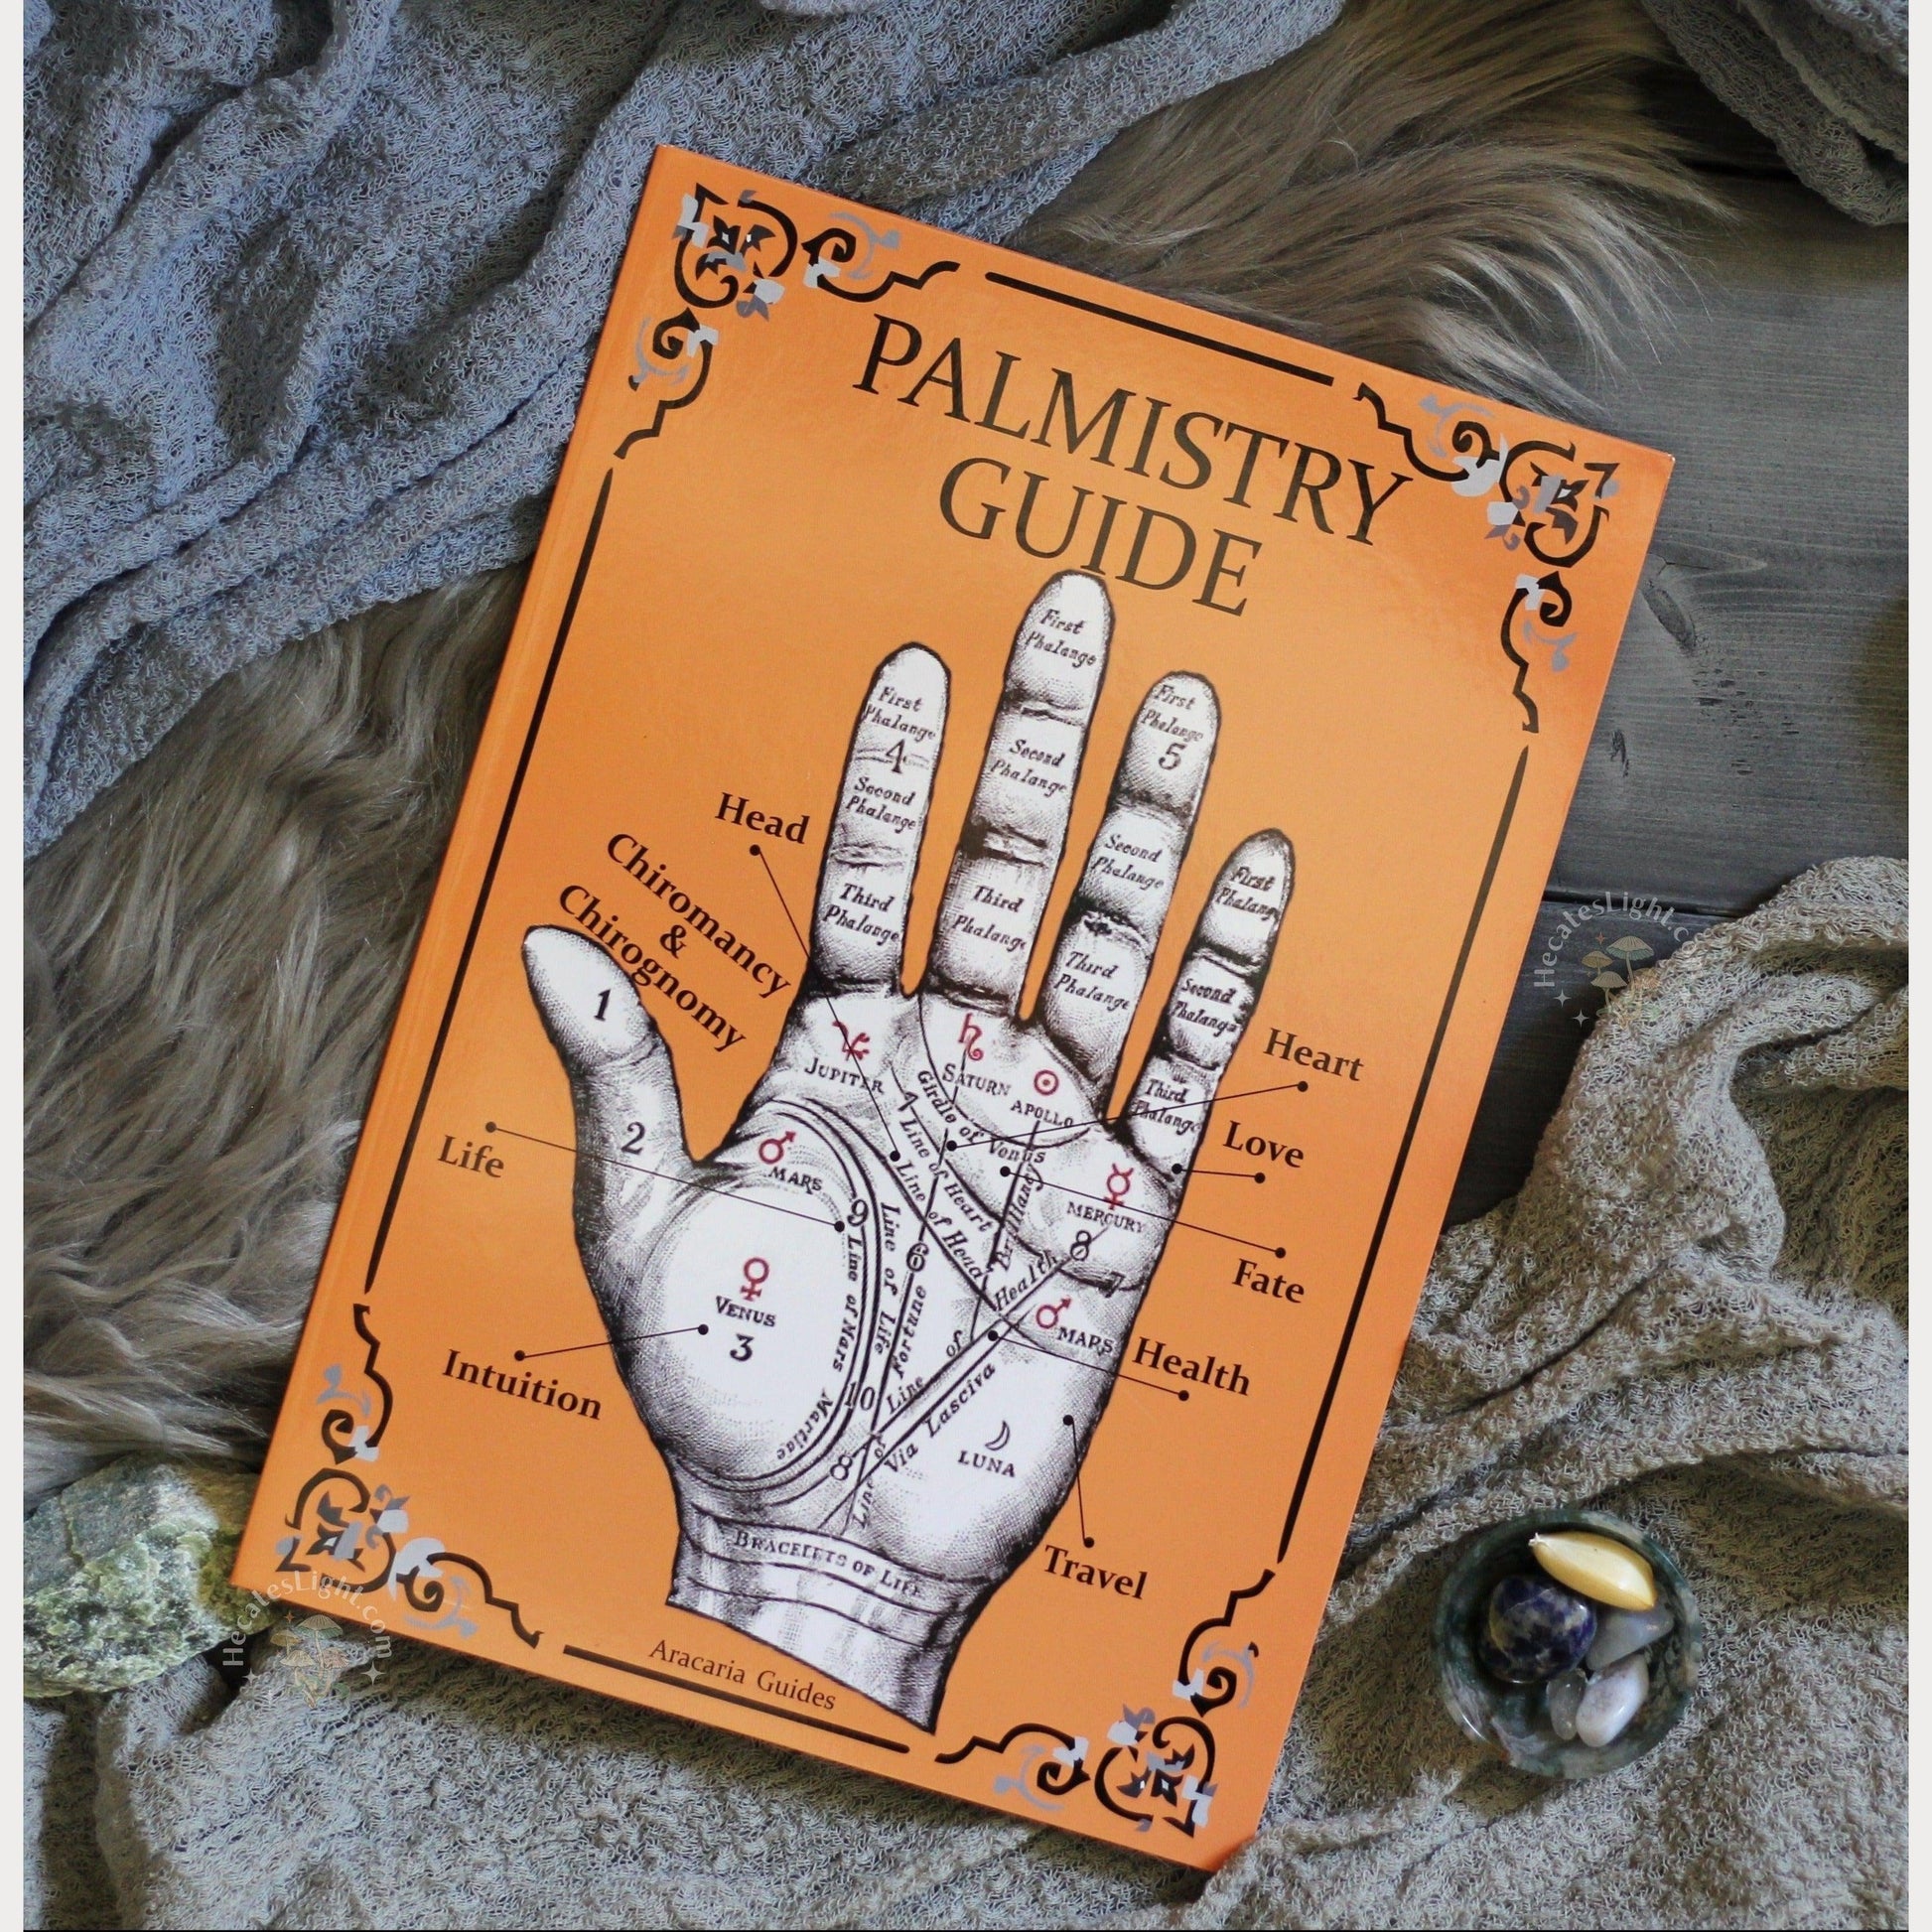 Palmistry Guide Hecate's Light booklet, calgary, canada, divination, divination tool, fortune telling, guide, palm, palmistry Palmistry Guide Hecate's Light booklet, calgary, canada, divination, divination tool, fortune telling, guide, palm, palmistry metaphysical occult supplies witchy hecateslight.com witchcraft cottagecore witch gifts metaphysical occult supplies witchy hecateslight.com witchcraft cottagecore witch gifts